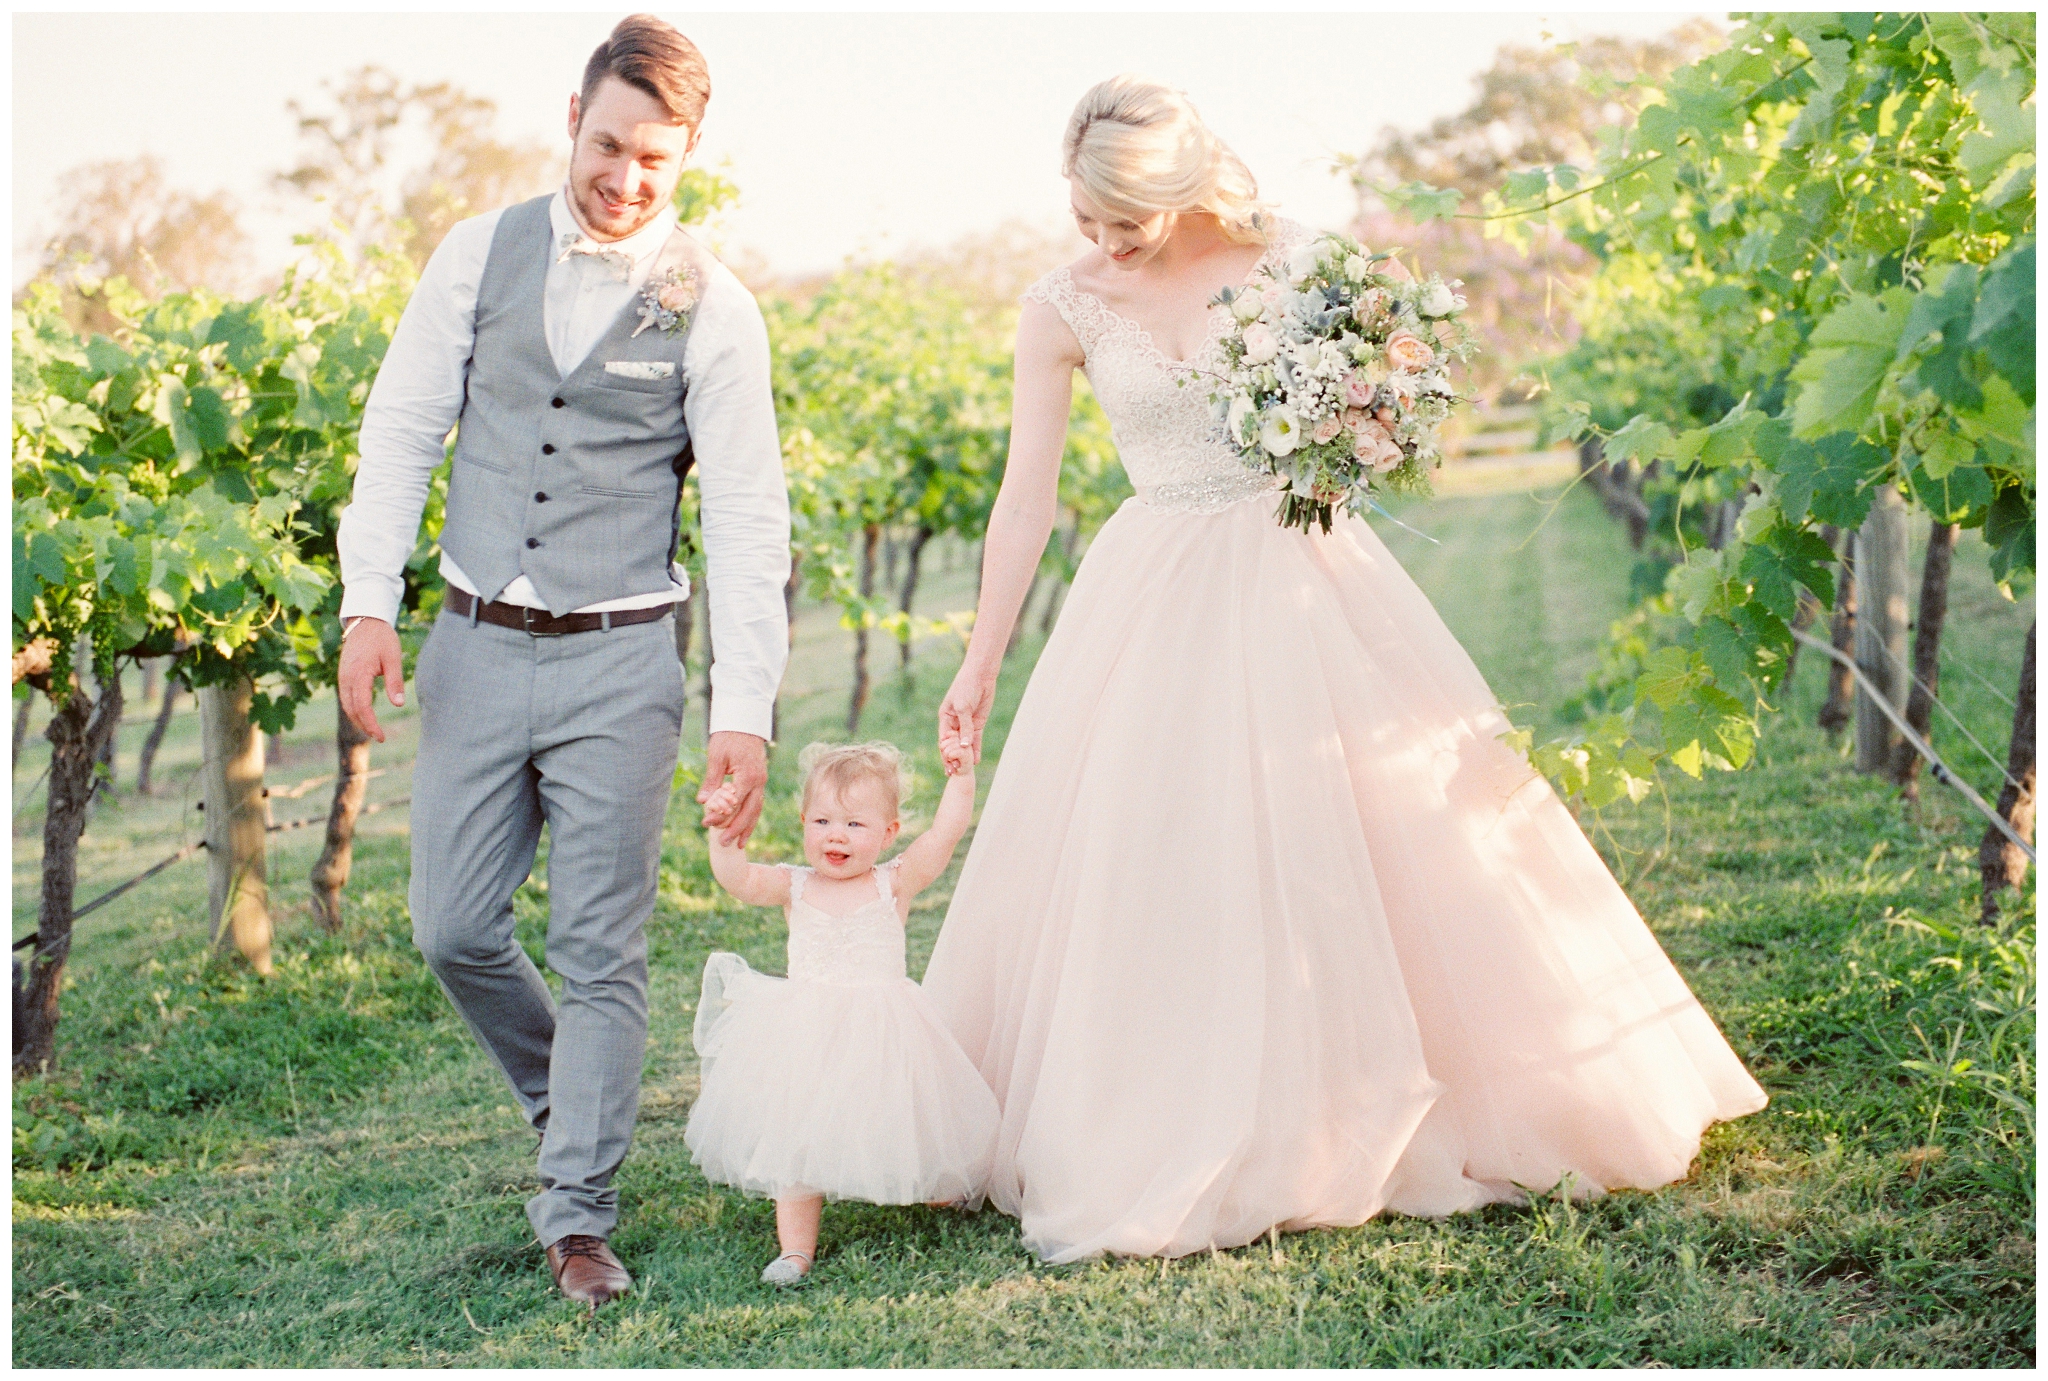 Tegan and Alex Wedding at Albert River Wines by Casey Jane Photography 65